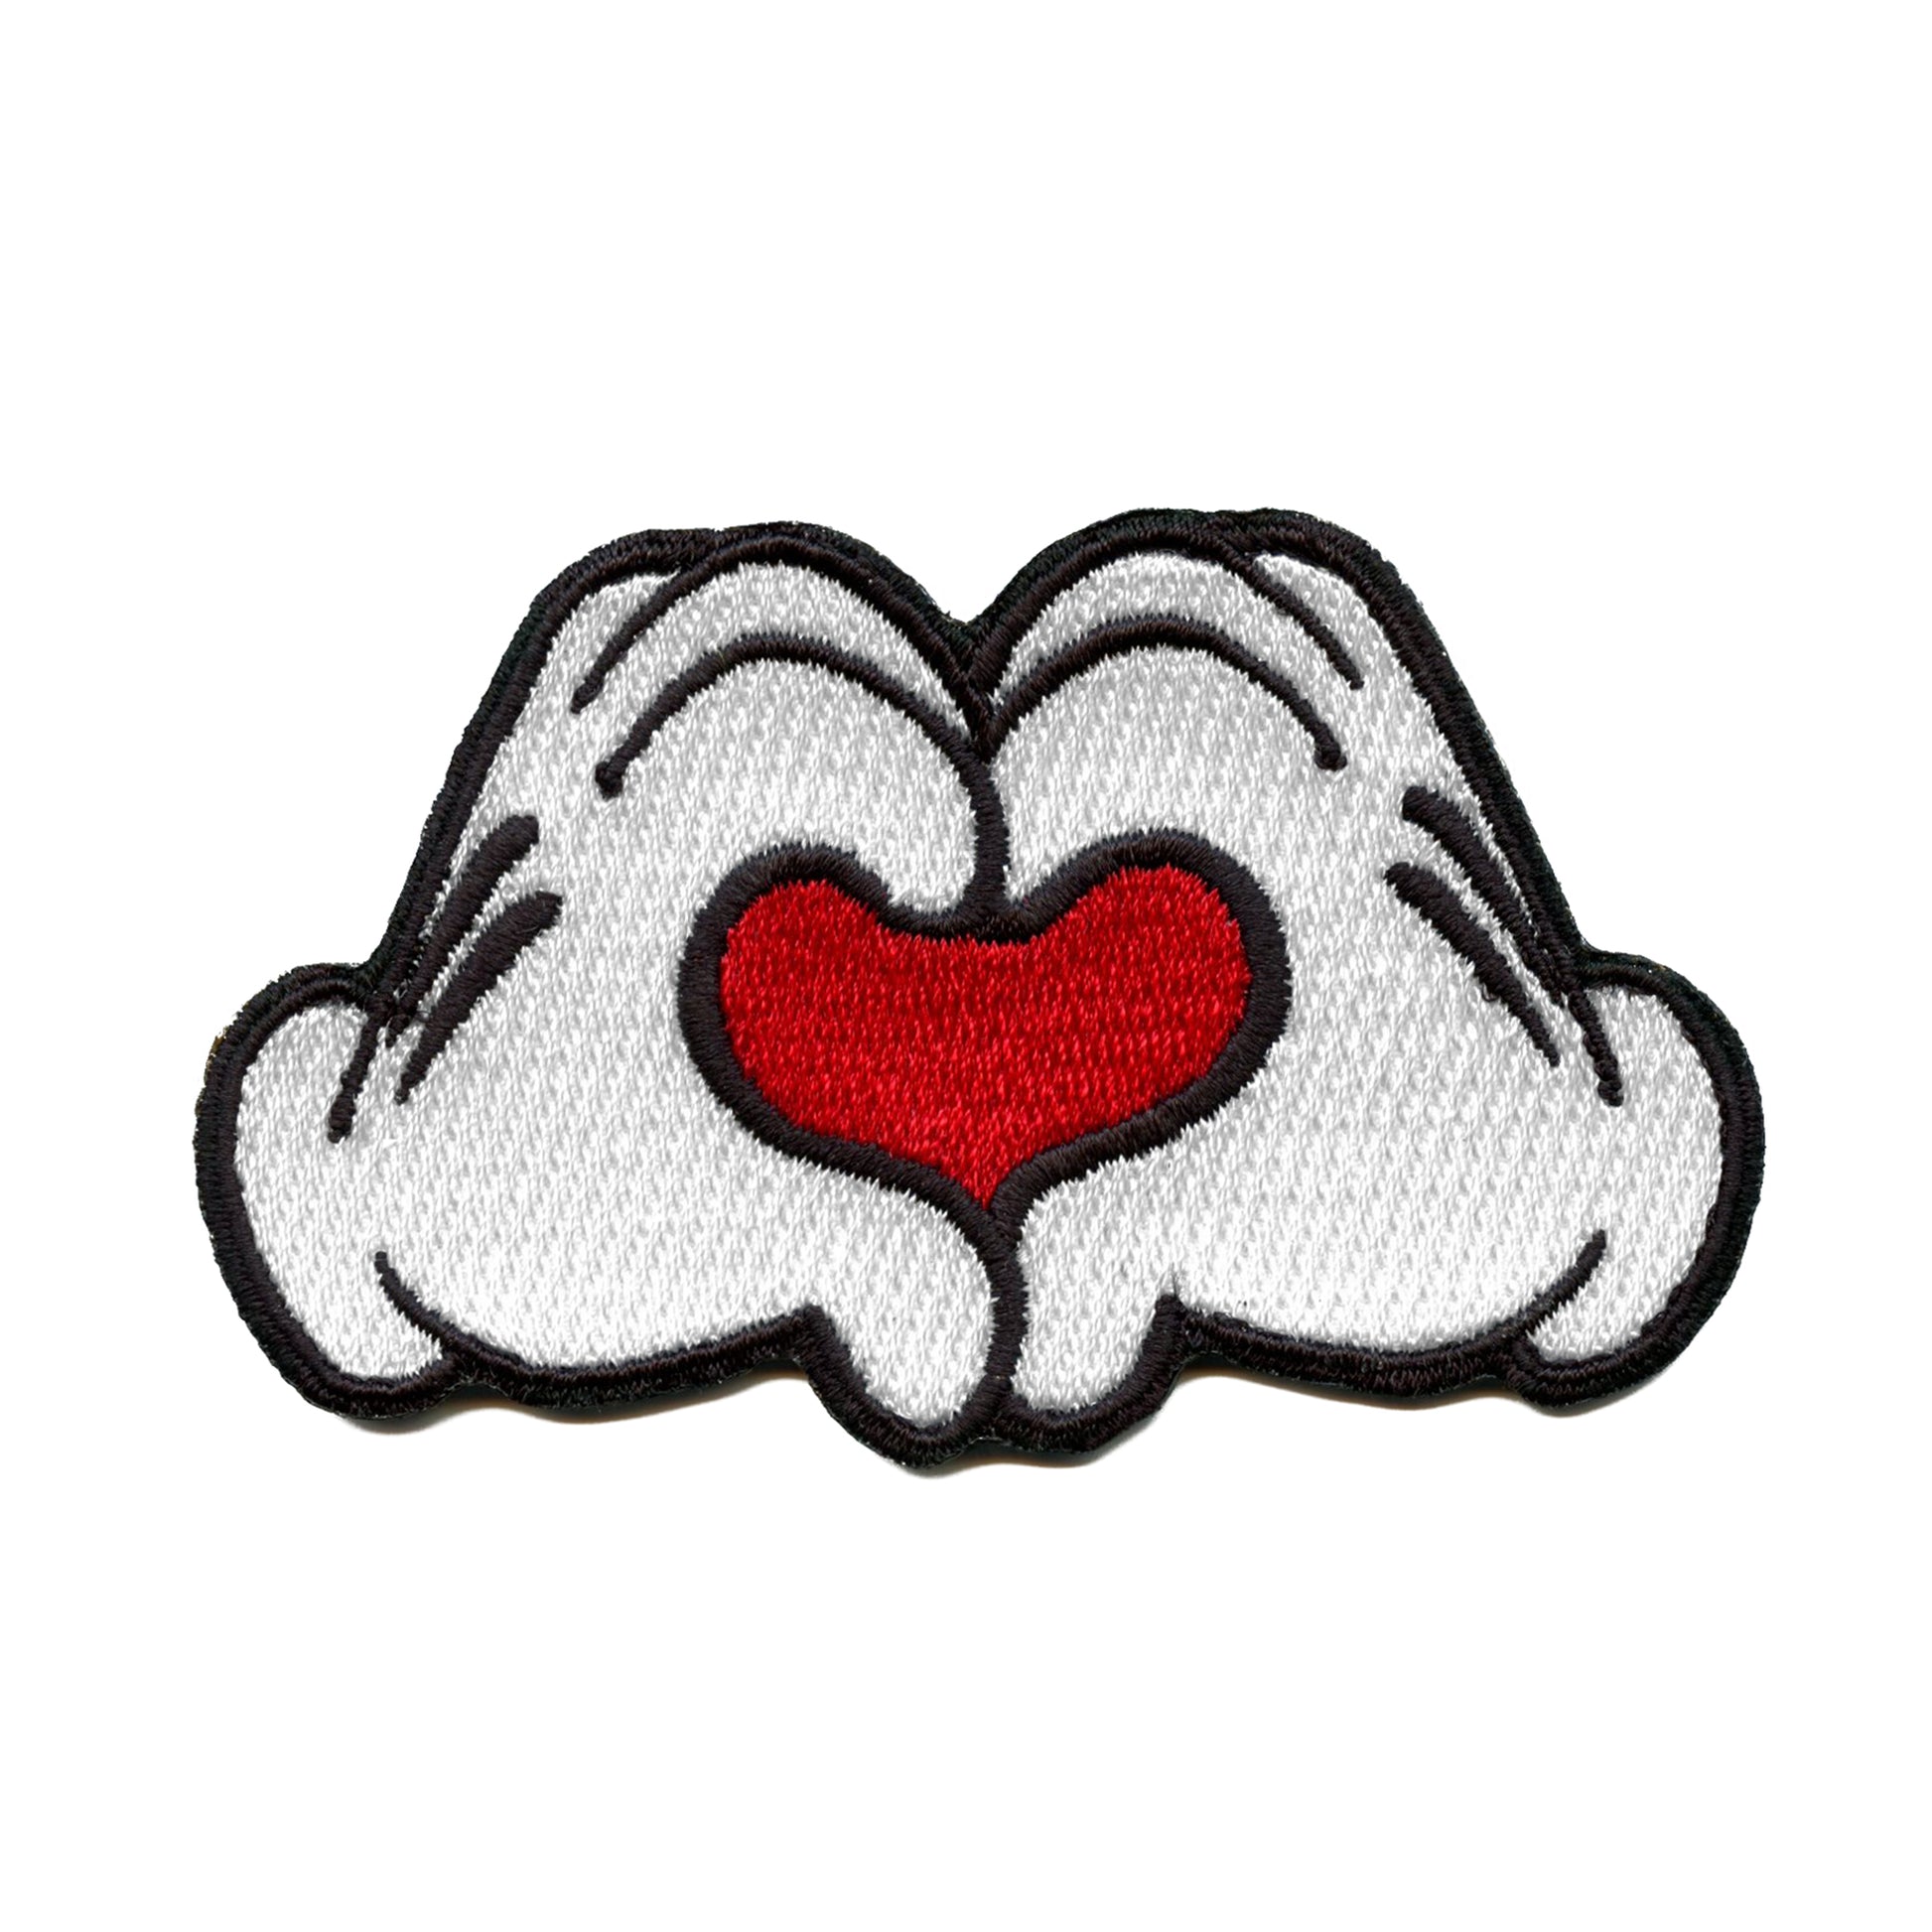 Heart Shape Glove Hands Patch Disney Sign Kids Embroidered Iron On 